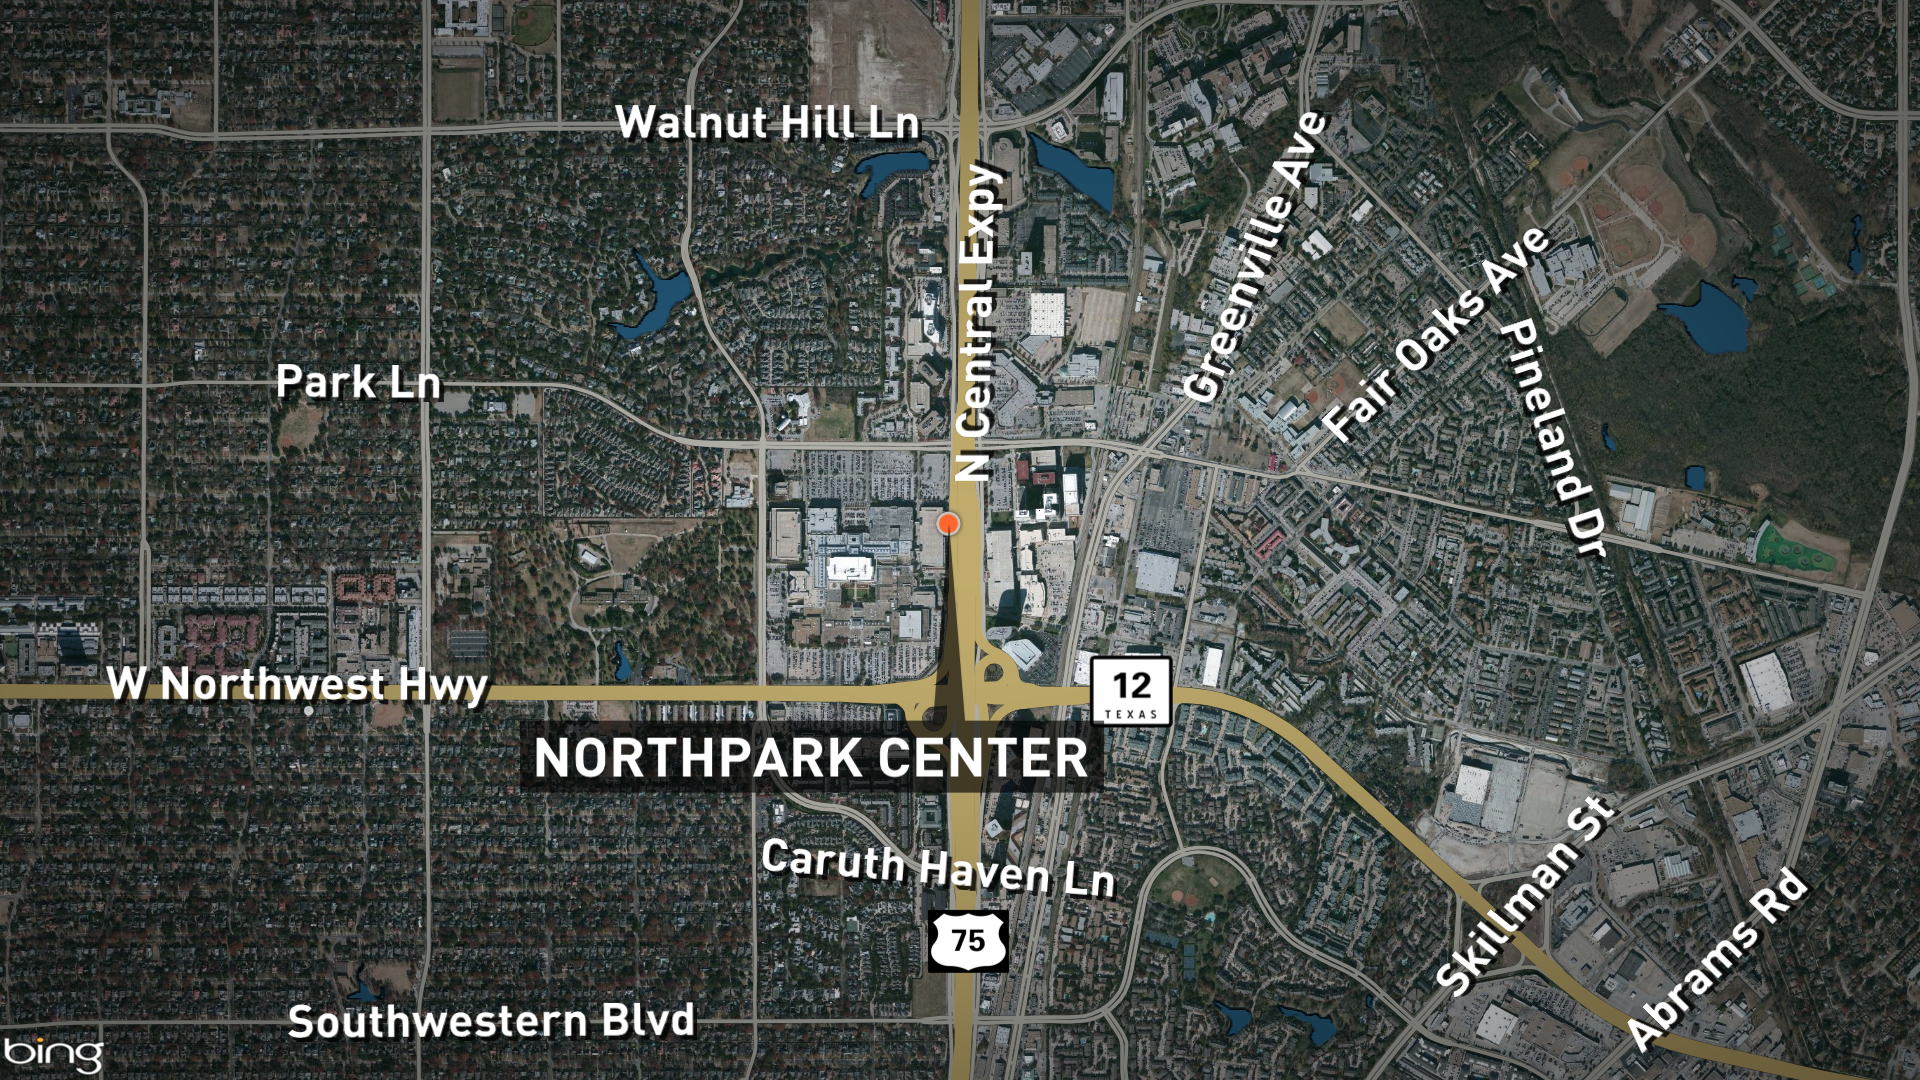 NorthPark Mall evacuated after small fire, will remain closed Saturday